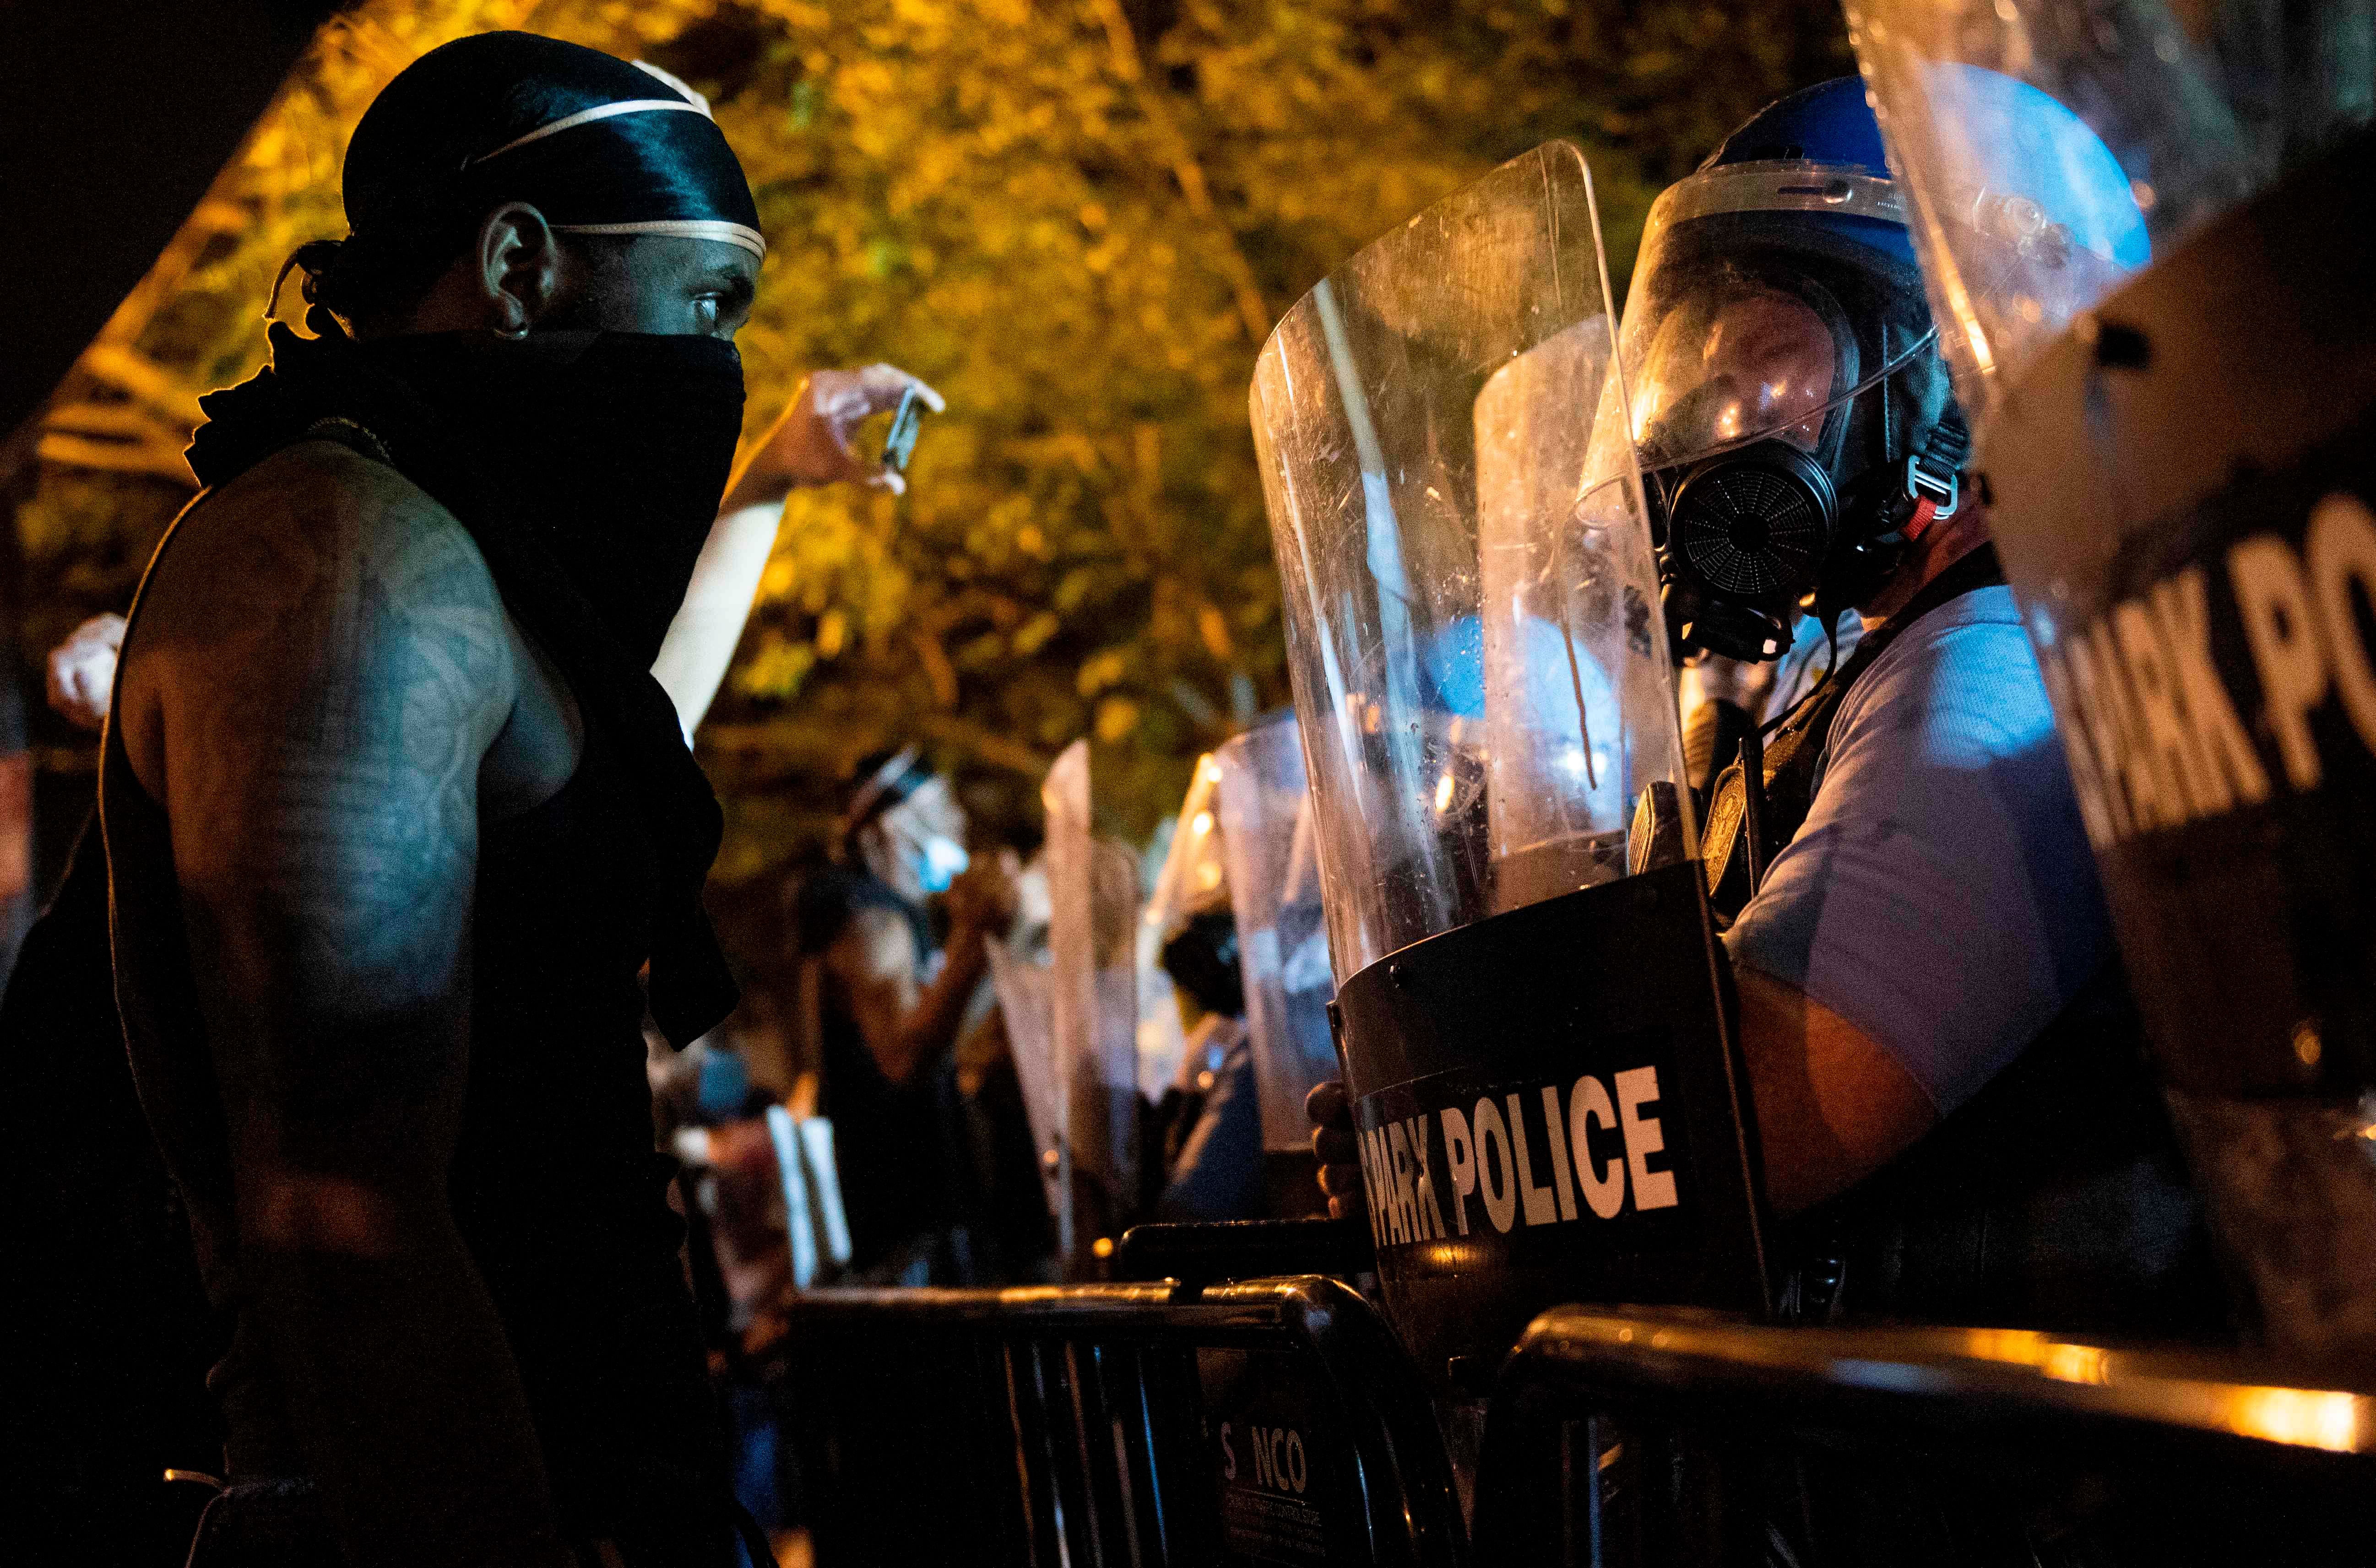 Riots over the weekend engulfed major US cities on Saturday night, and more violence was feared Sunday over the death of George Floyd in police custody (AFP photo)